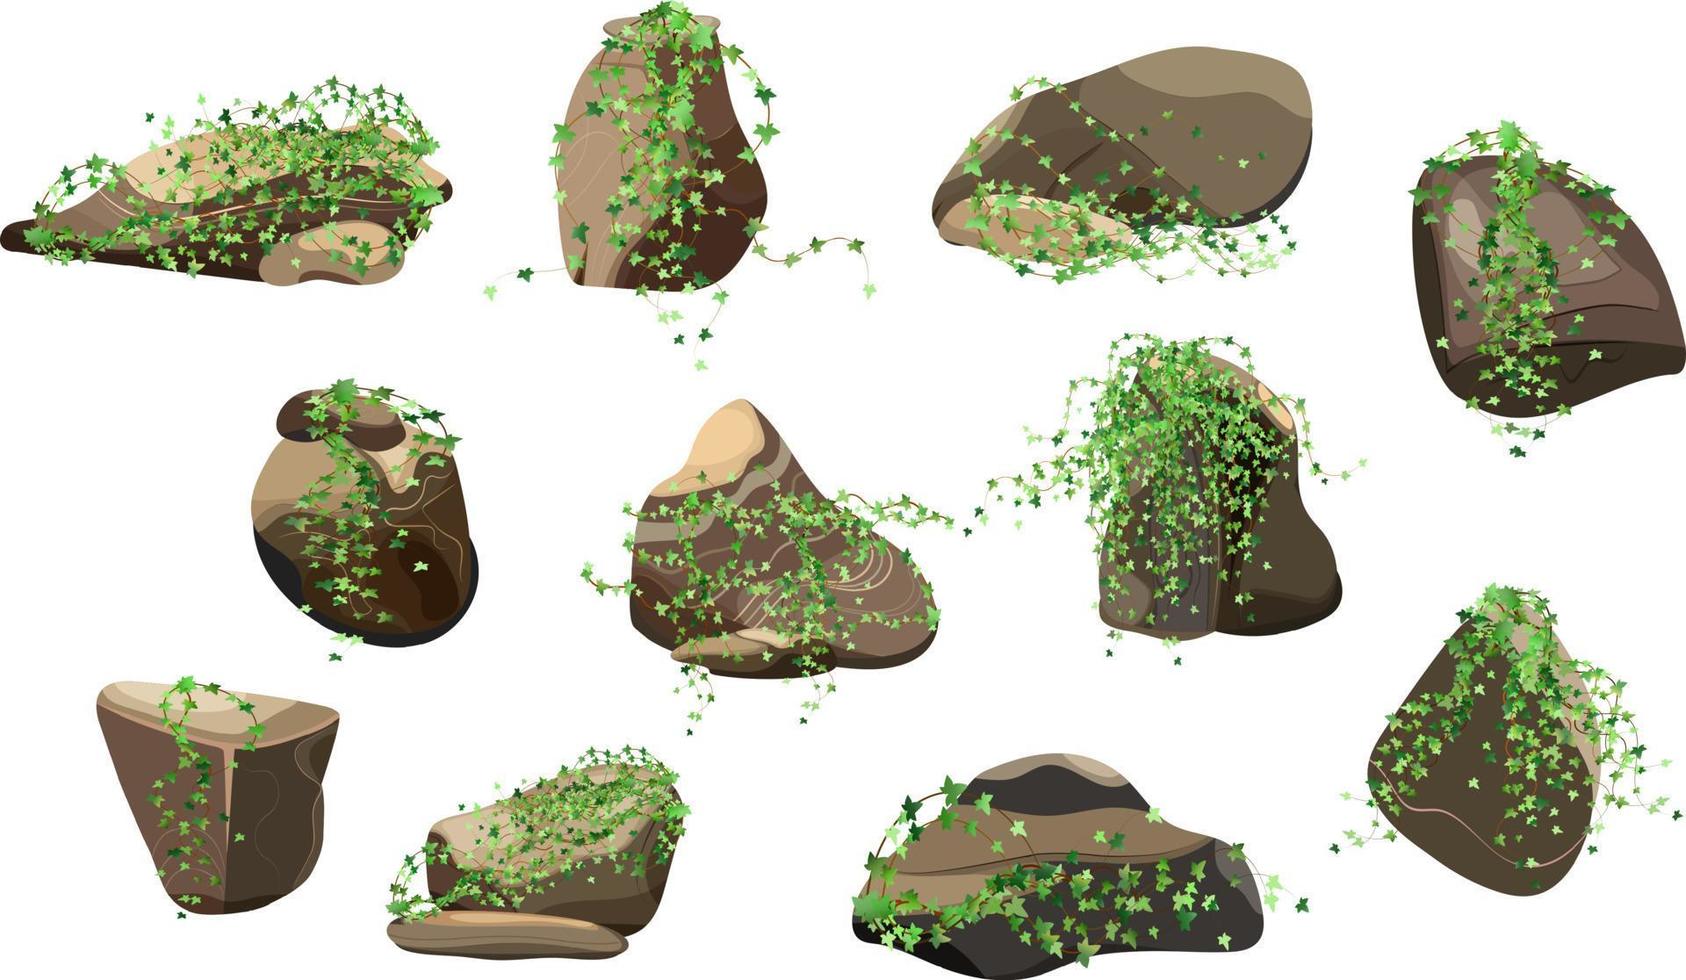 Collection of stones and plants of various shapes.Coastal pebbles,cobblestones,gravel,minerals and geological formations.Rock fragments,boulders and building material. vector